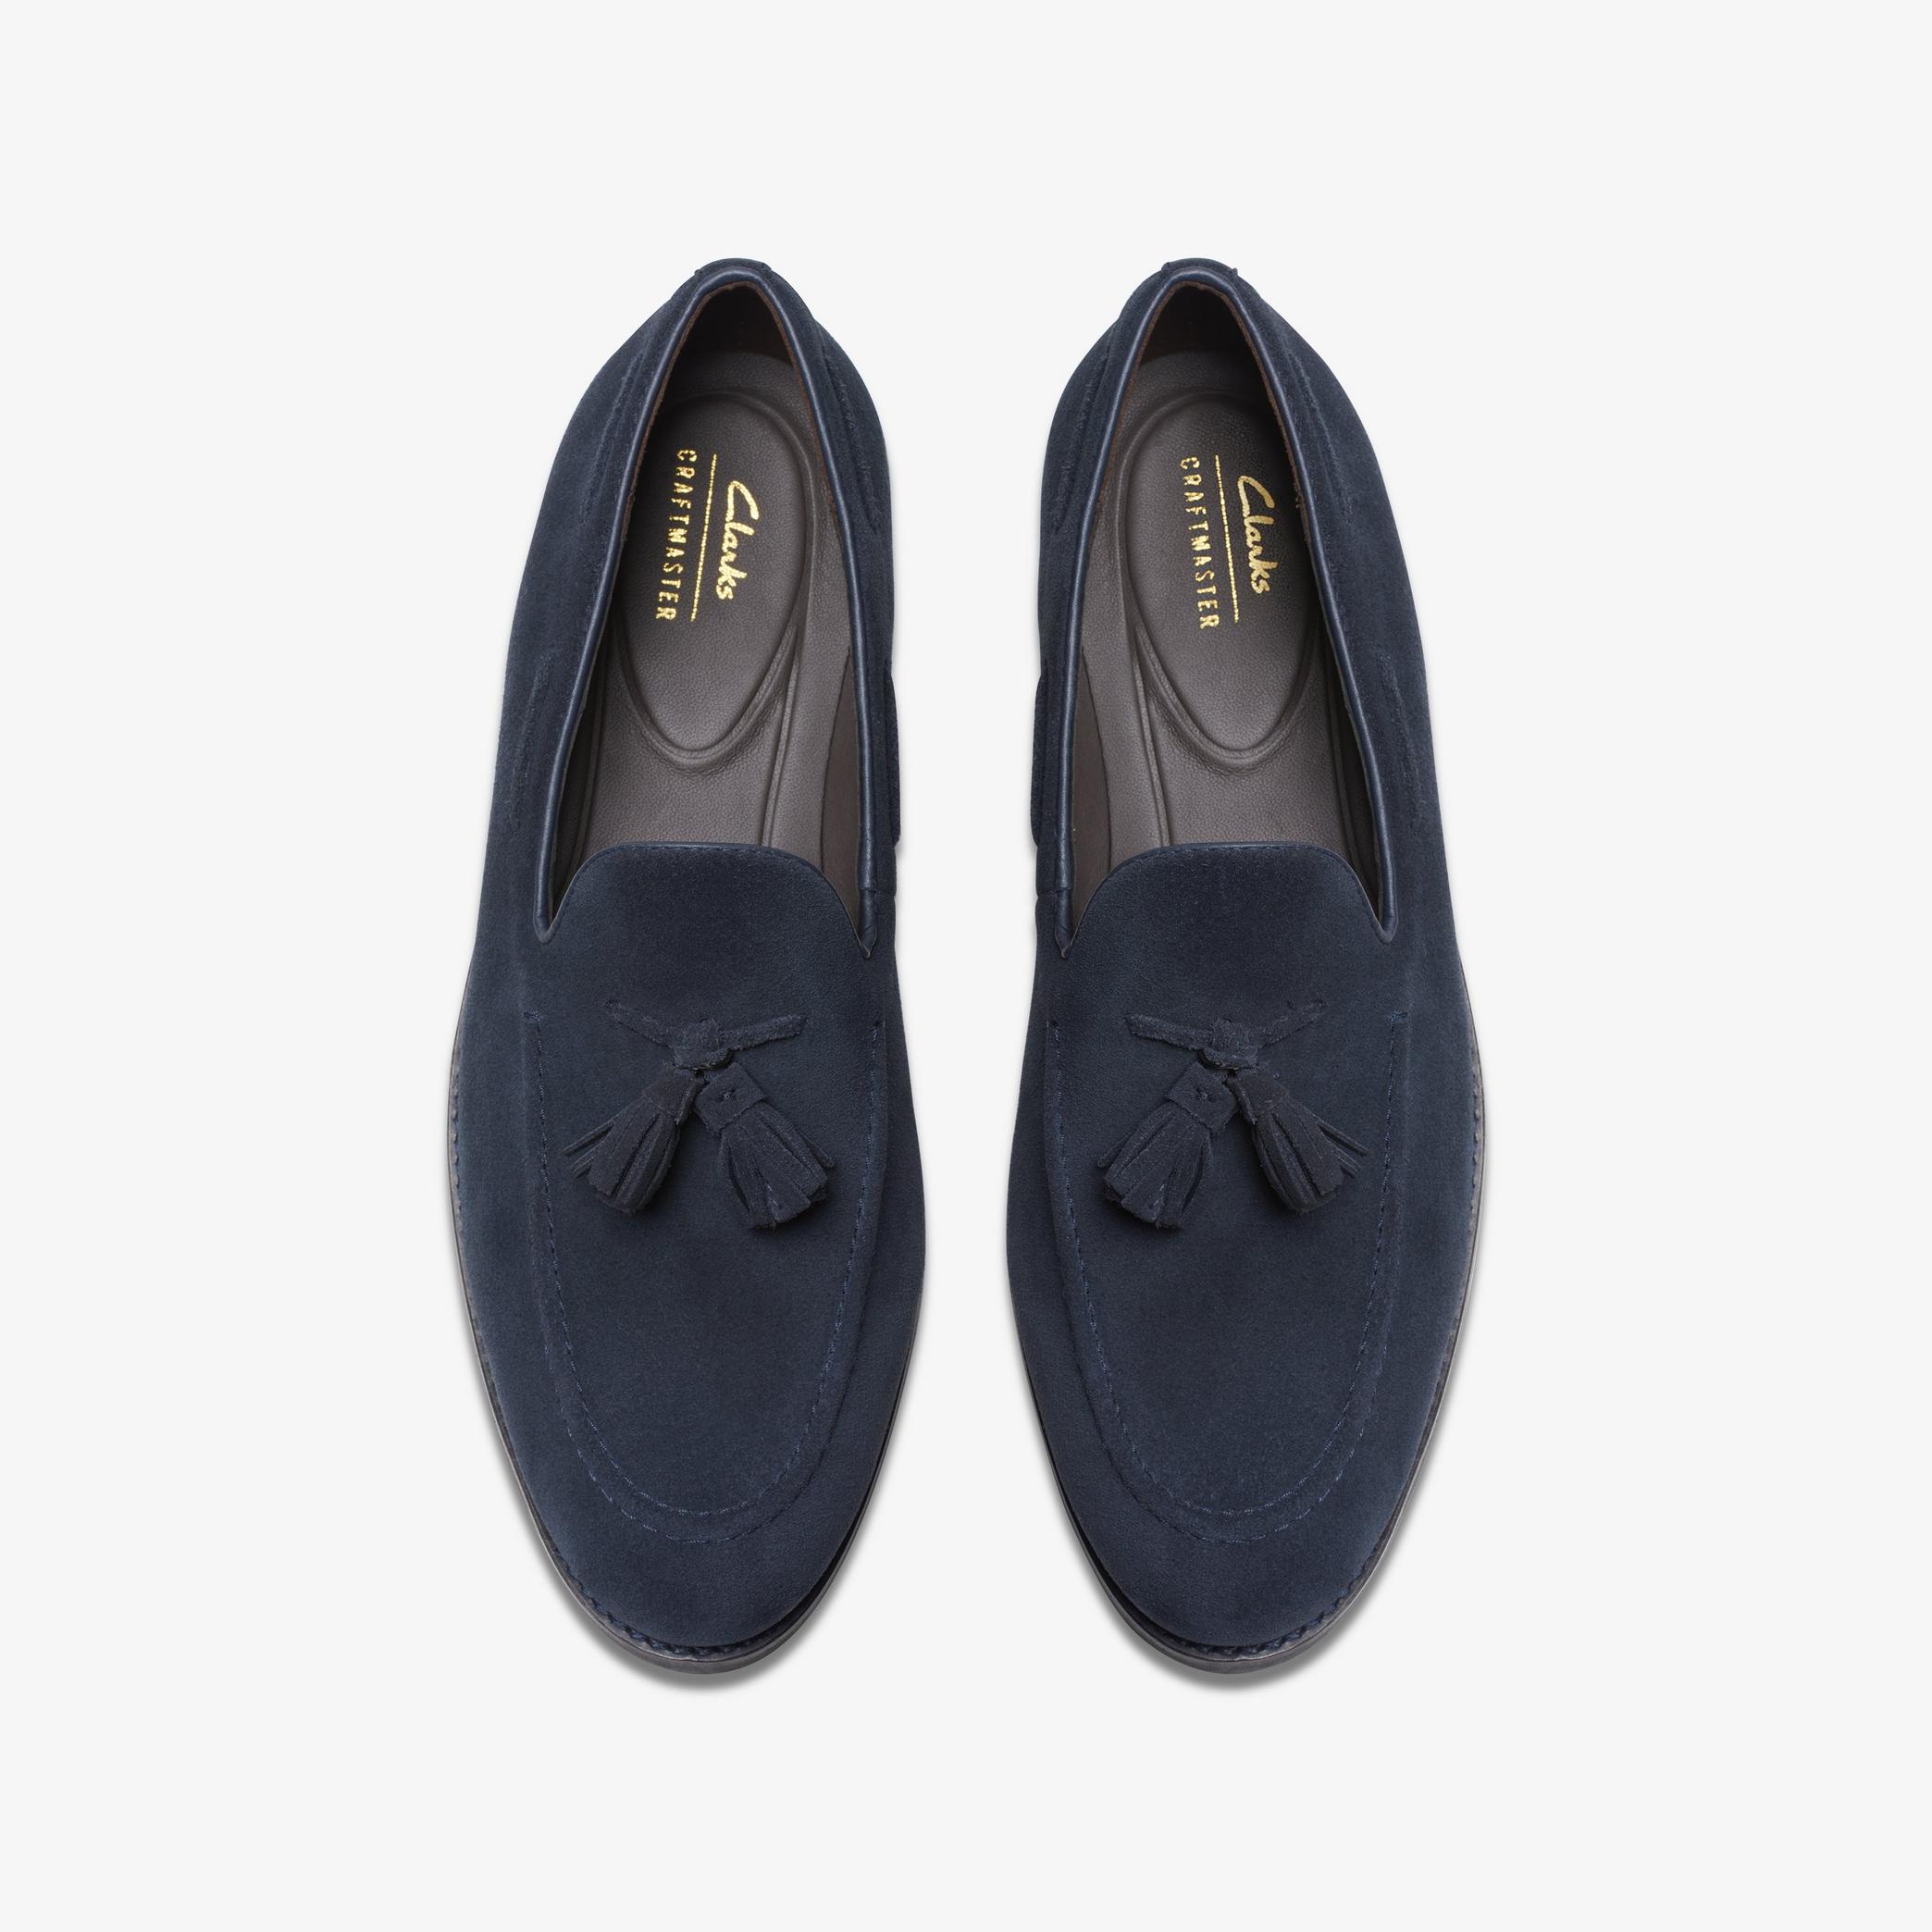 Craft Arlo Trim Navy Suede Shoes, view 6 of 7